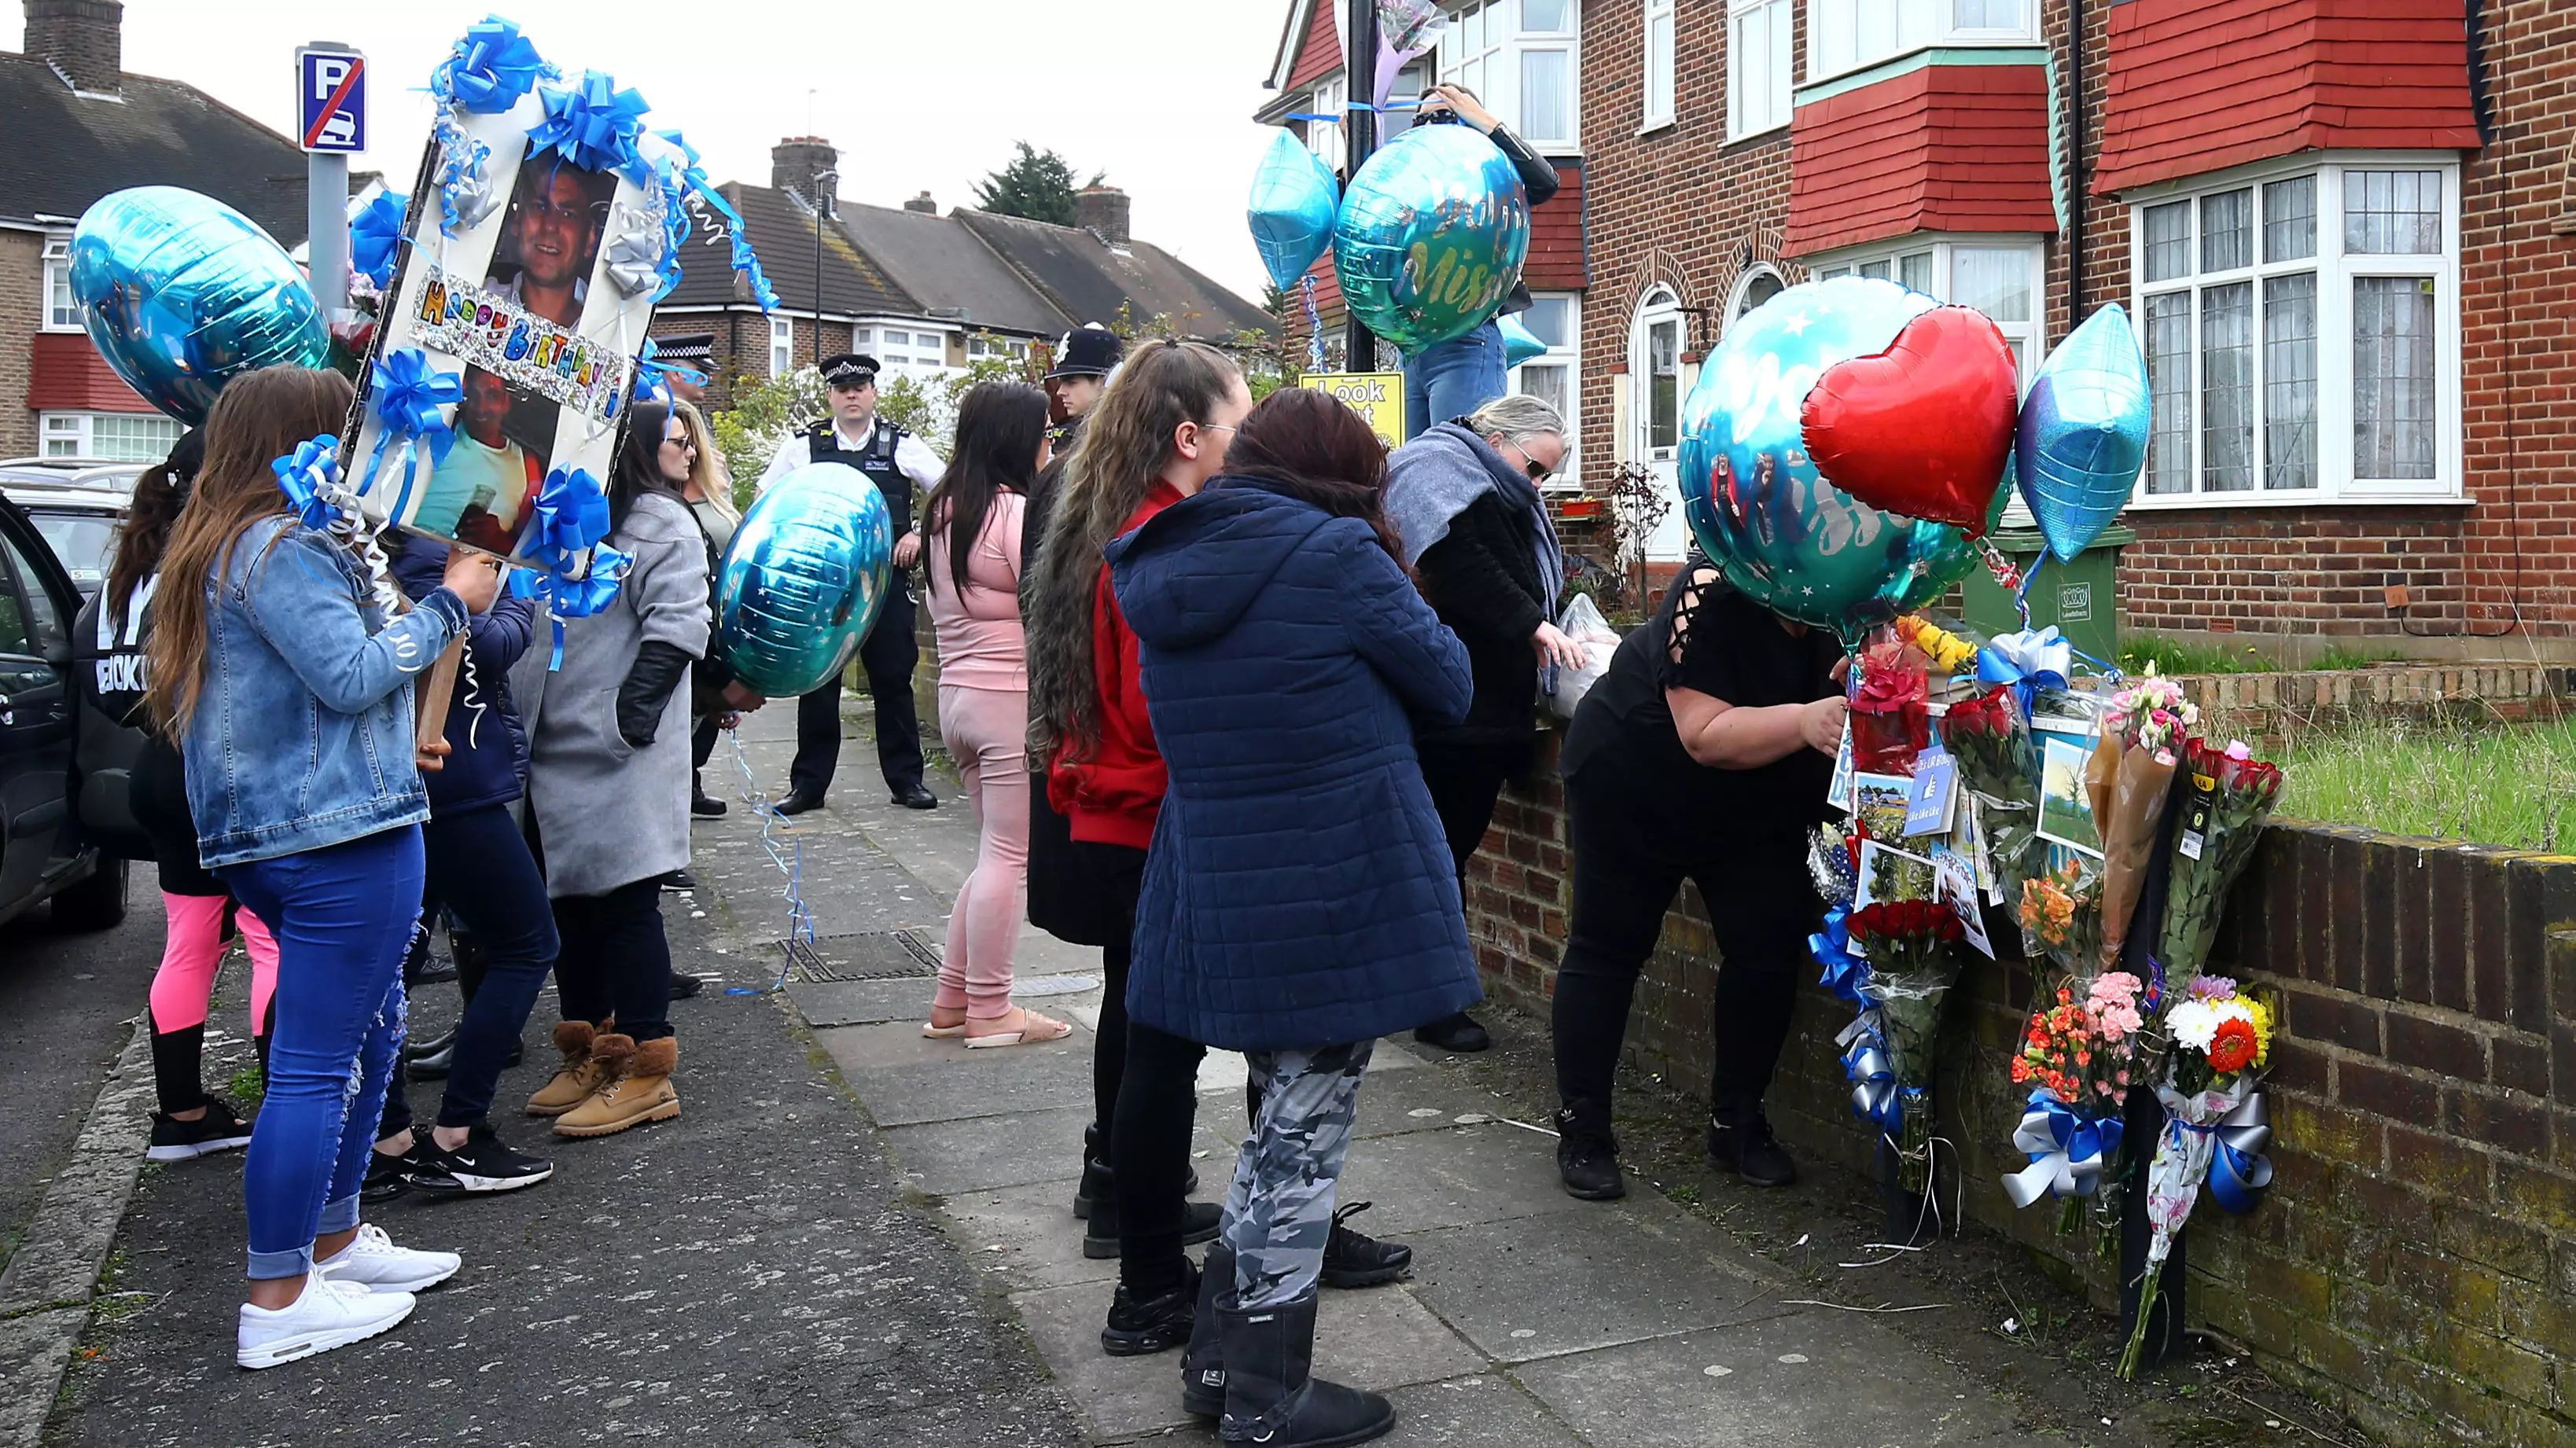 Relatives Of Dead Burglar Clash With Neighbours And Police After Laying Flowers For Birthday Tribute